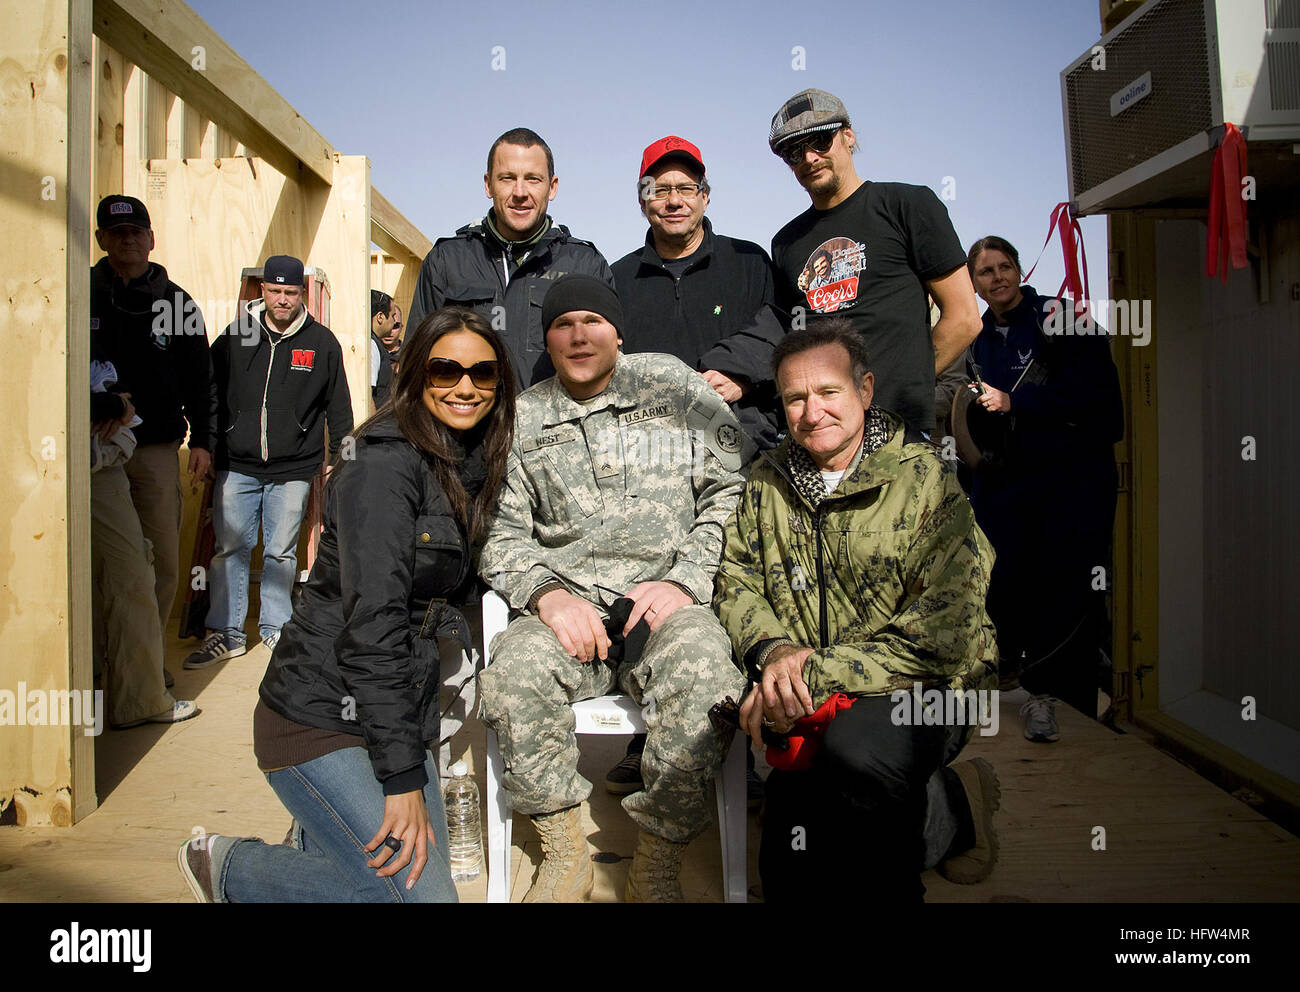 071220-N-0696M-073 Logistics Support Area Anaconda, Balad, Iraq (Dec. 20, 2007) -  Seven time Tour de France champion Lance Armstrong, Comedian Lewis Black, musician Kid Rock, Miss USA Rachel Smith and comedian Robin Williams poses for a photo with wounded warrior U.S. Army Cpl. Jordan West of Chicago during the 2007 USO Holiday Tour stop at Logistics Support Area Anaconda, Balad, Iraq, Dec. 20, 2007. DoD photo by Mass Communication Specialist 1st Class Chad J. McNeeley (Released) USO Holiday Tour Visits Balad, Stock Photo